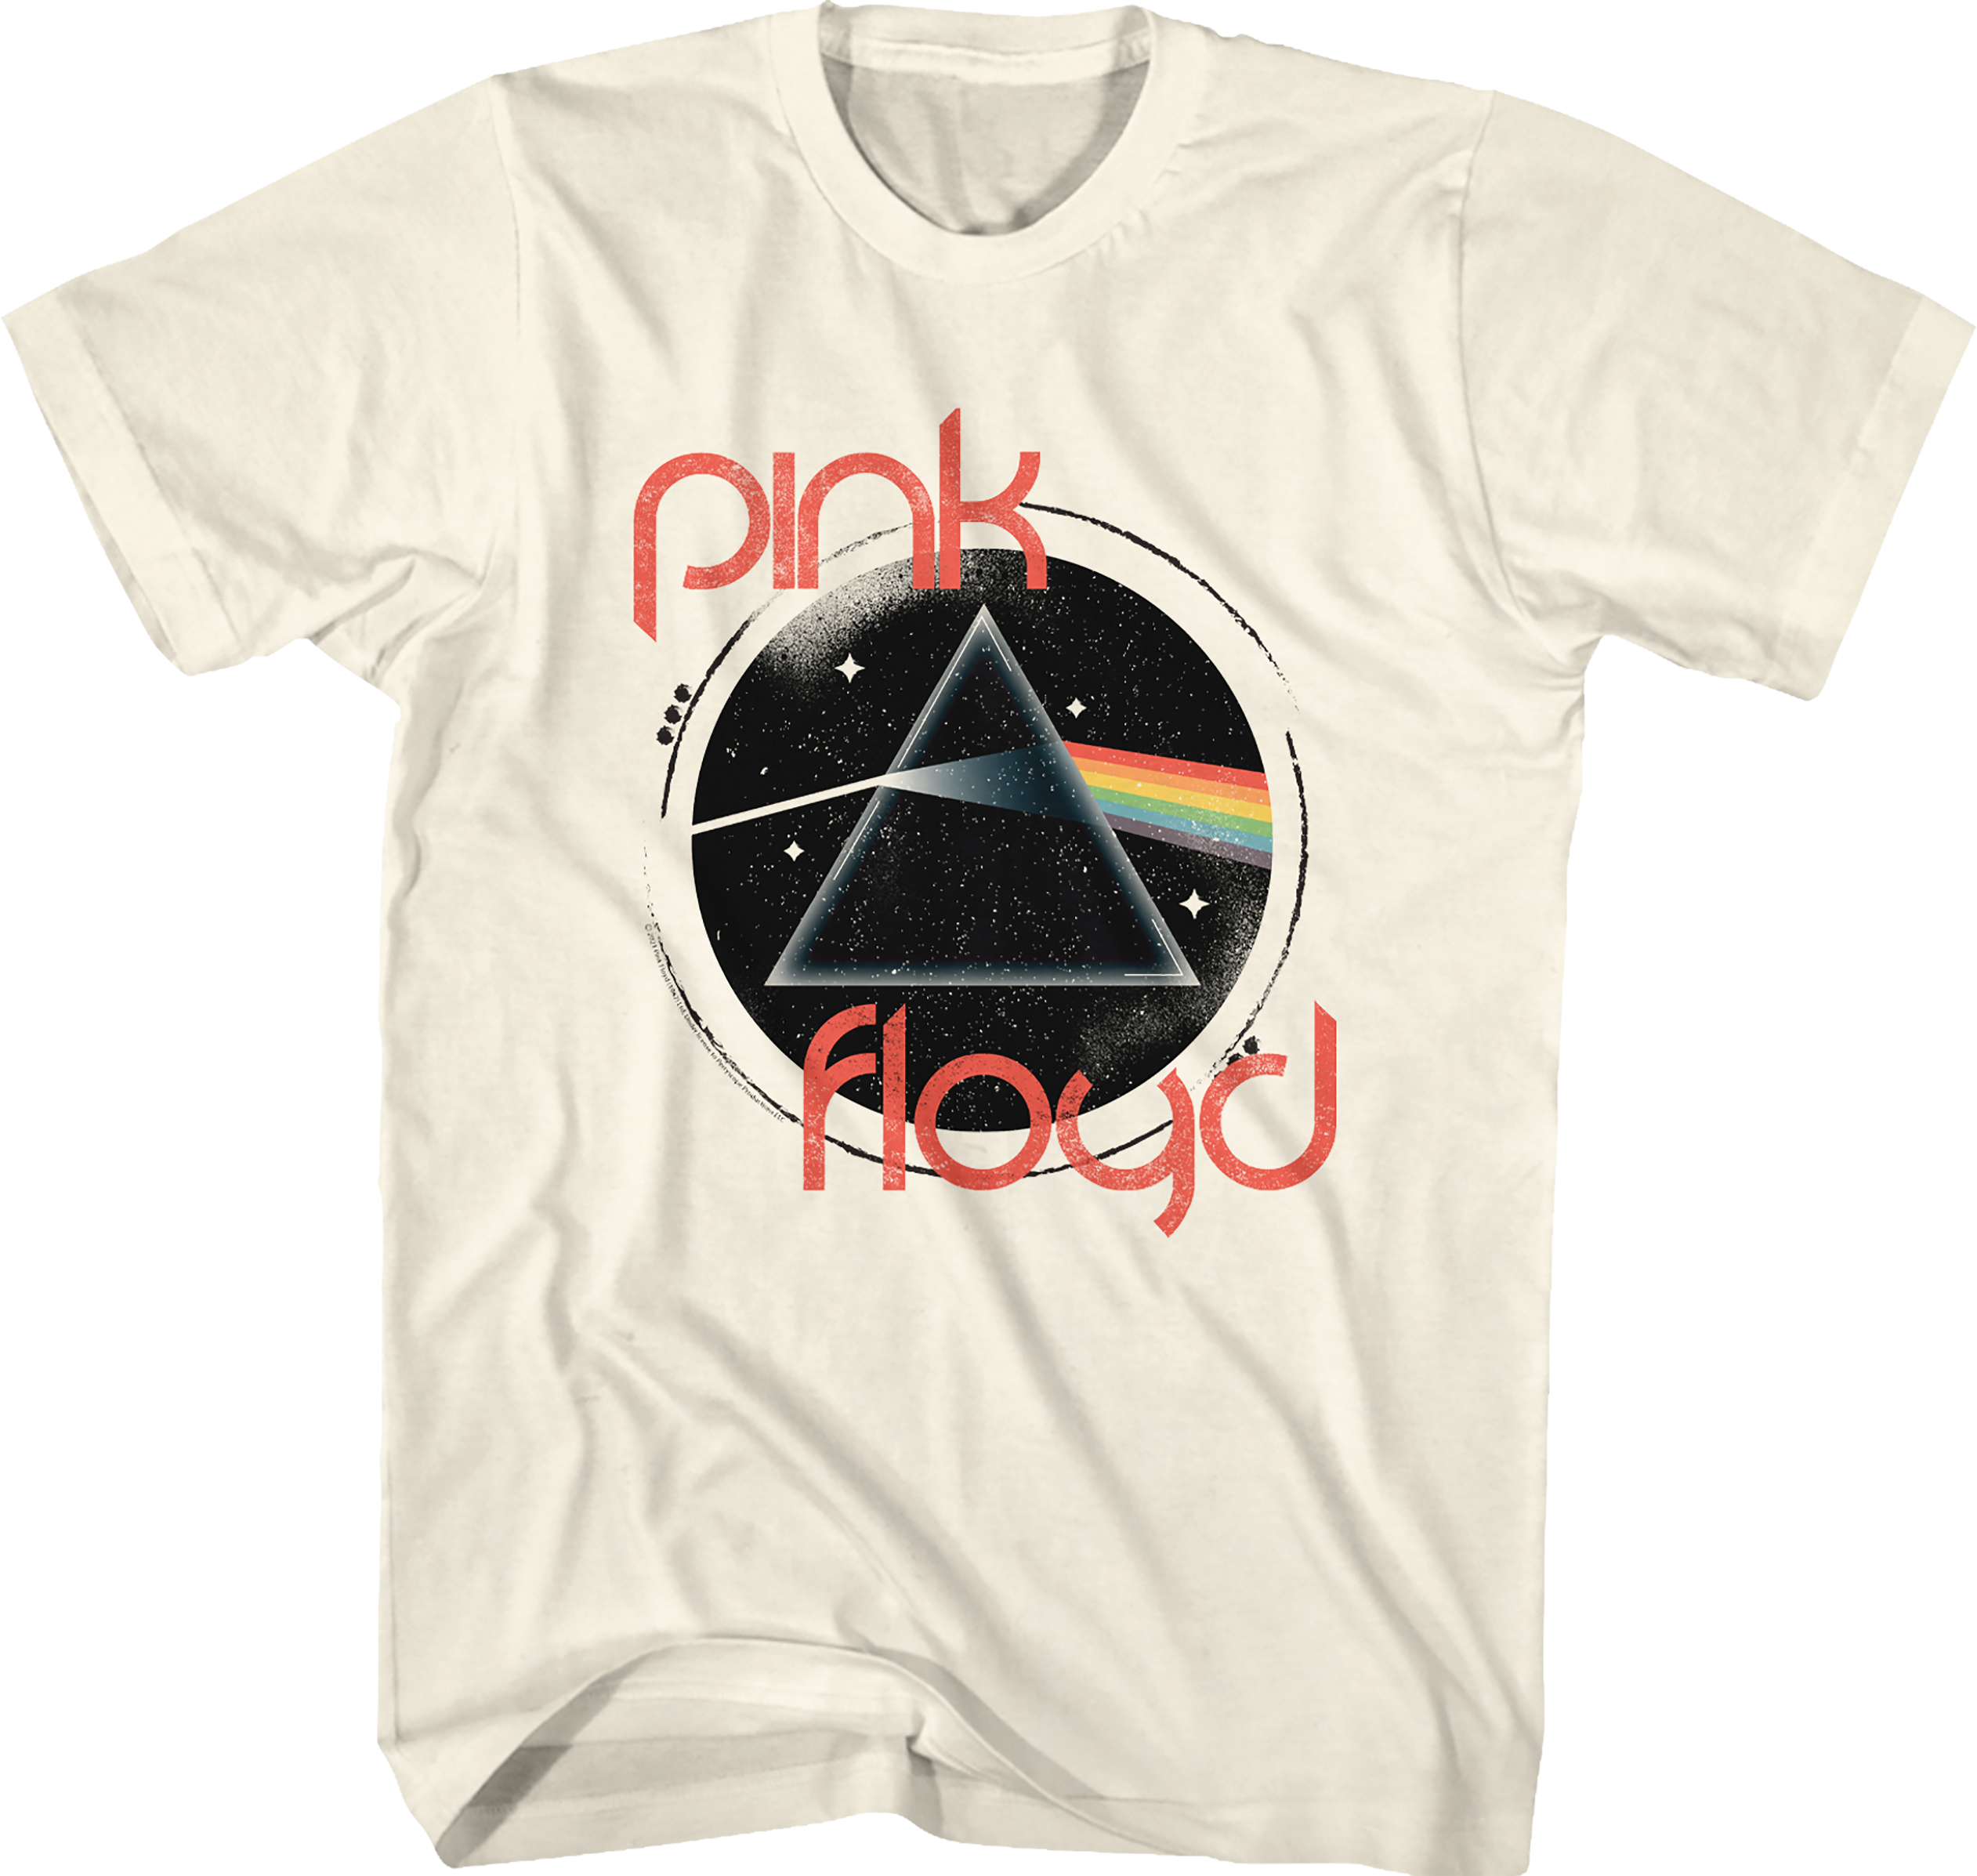 Distressed Circle Dark Side of the Moon Pink Floyd T-Shirt